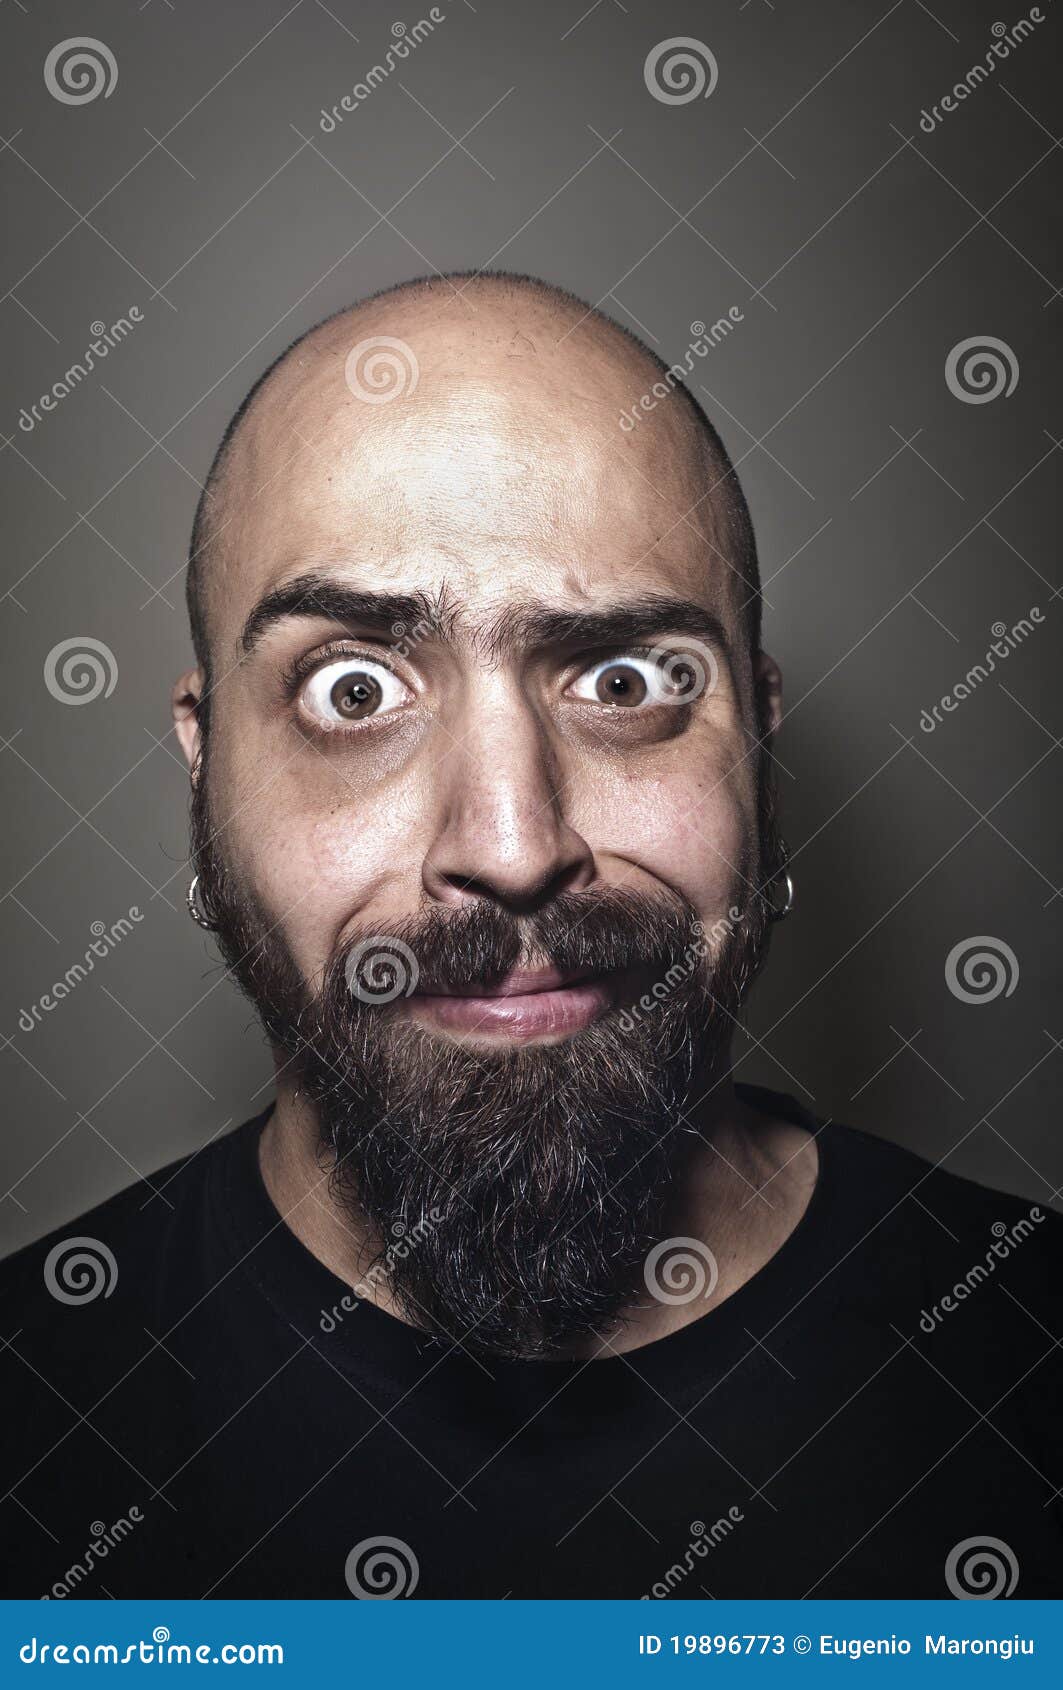 Man With Stupid Face Stock Photos - Image: 19896773